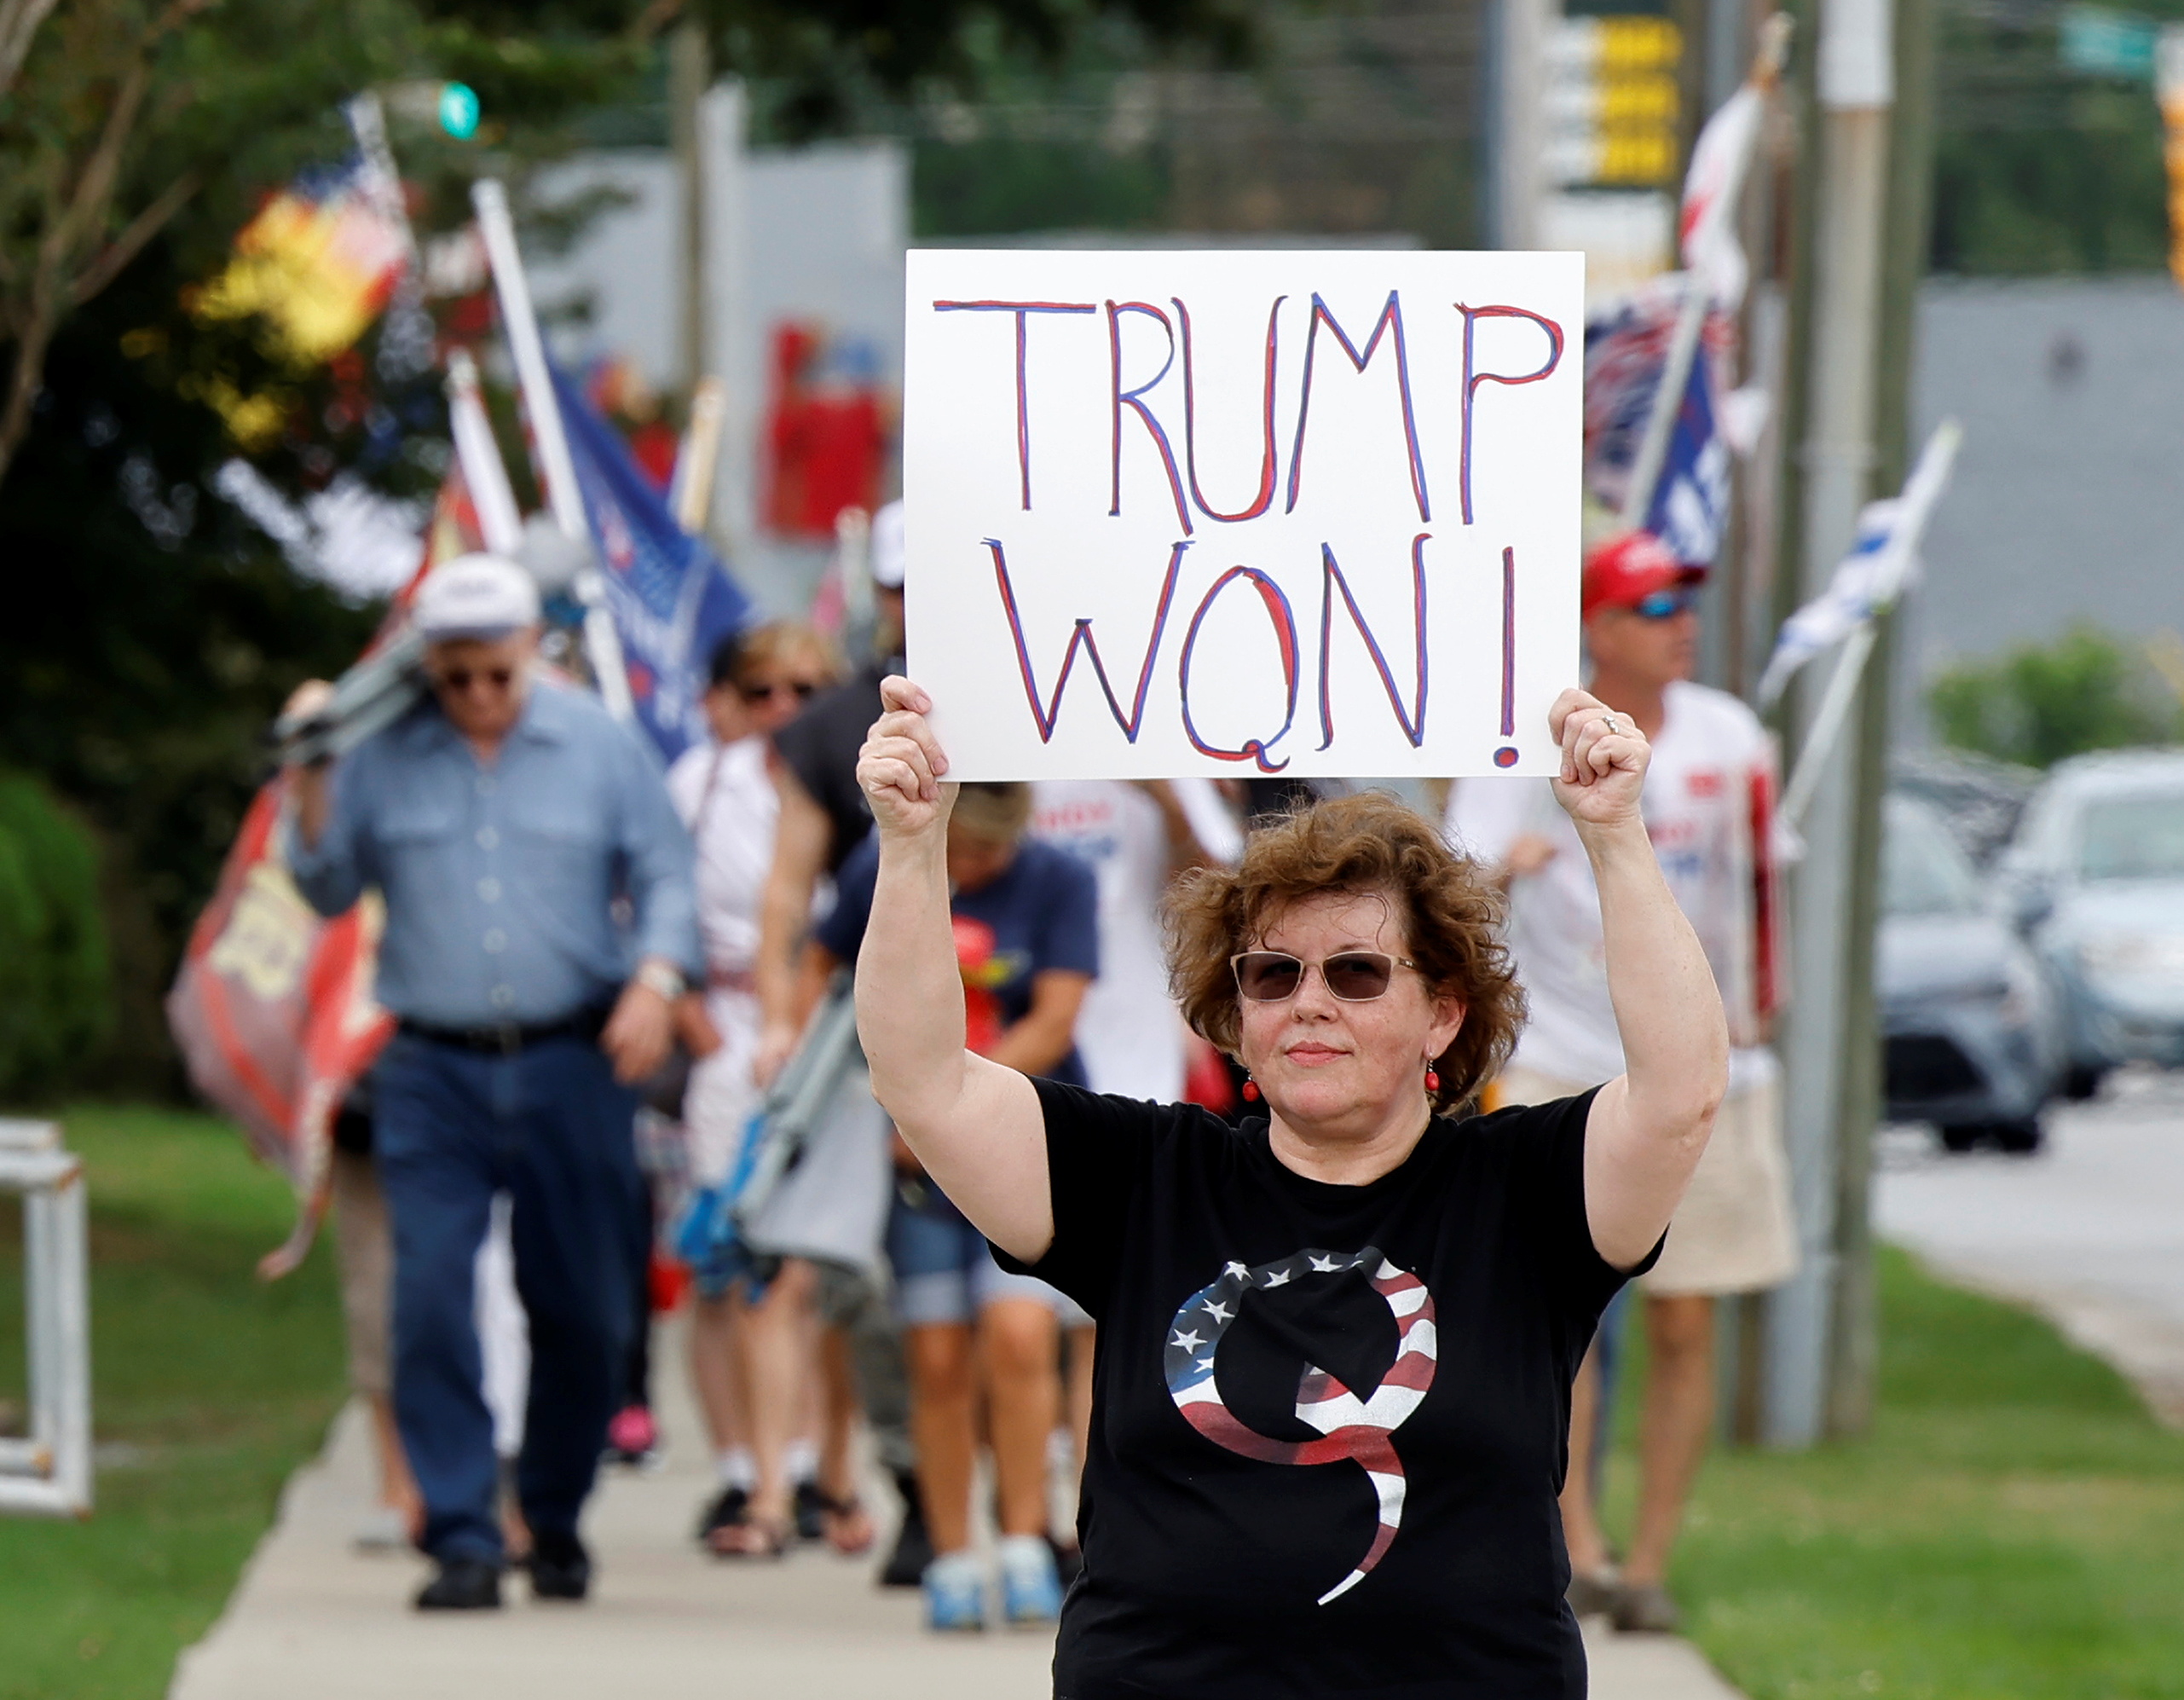 Supporter of former President Trump wears QAnon shirt outside the North Carolina GOP convention in Greenville